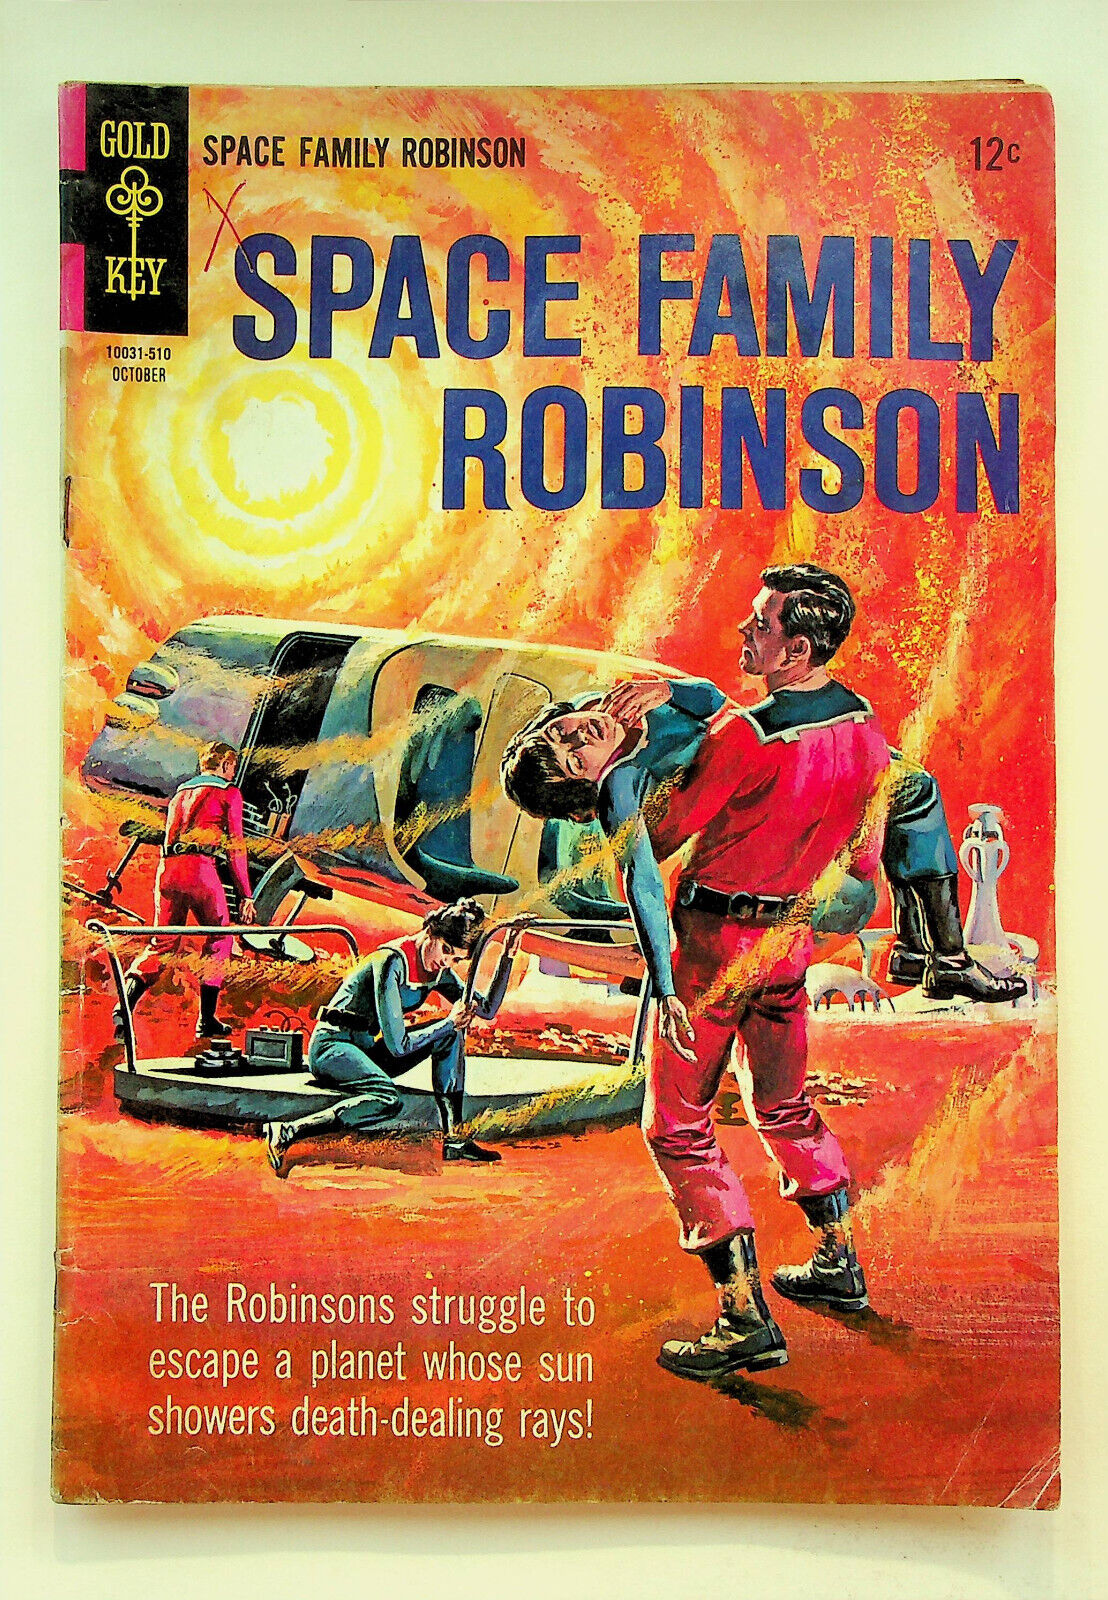 Space Family Robinson Lost in Space #14 (Oct 1965, Western Publishing) - Good-